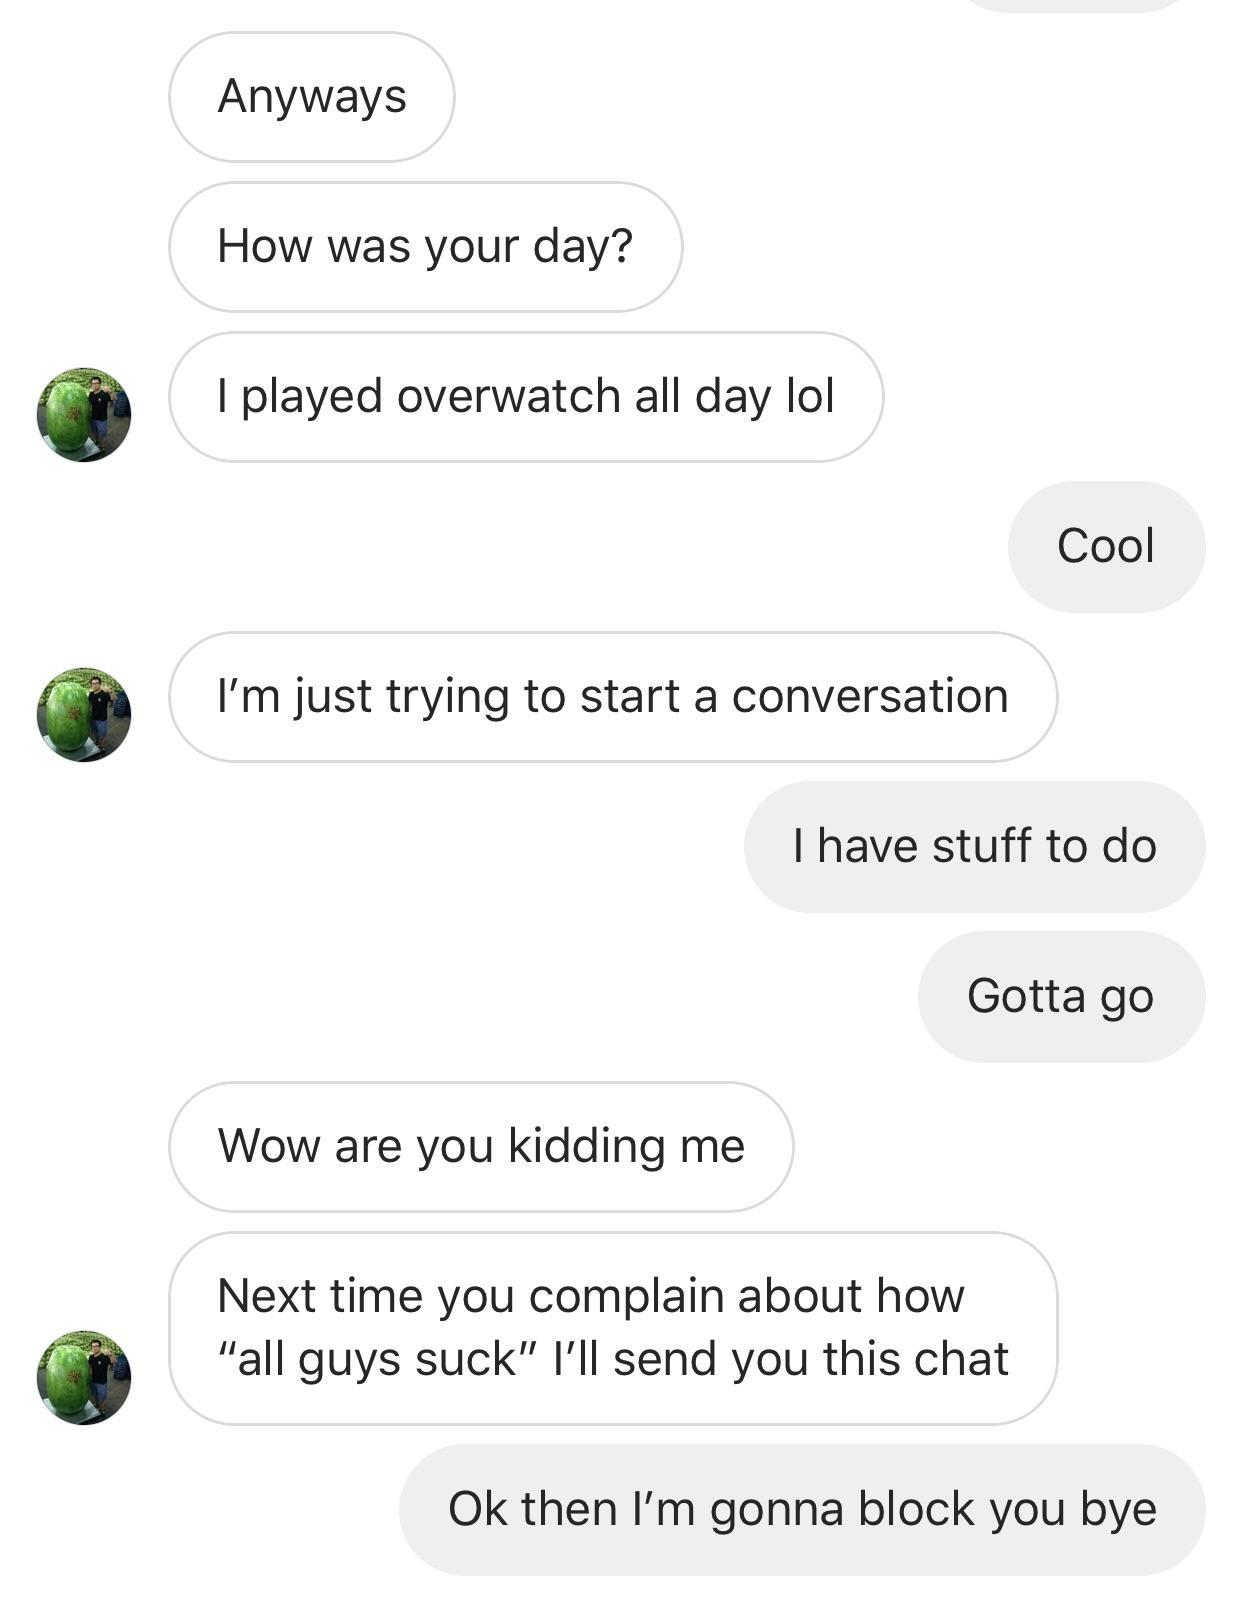 nice guys chat - Anyways How was your day? I played overwatch all day lol Cool I'm just trying to start a conversation I have stuff to do Gotta go Wow are you kidding me Next time you complain about how "all guys suck" I'll send you this chat Ok then I'm 